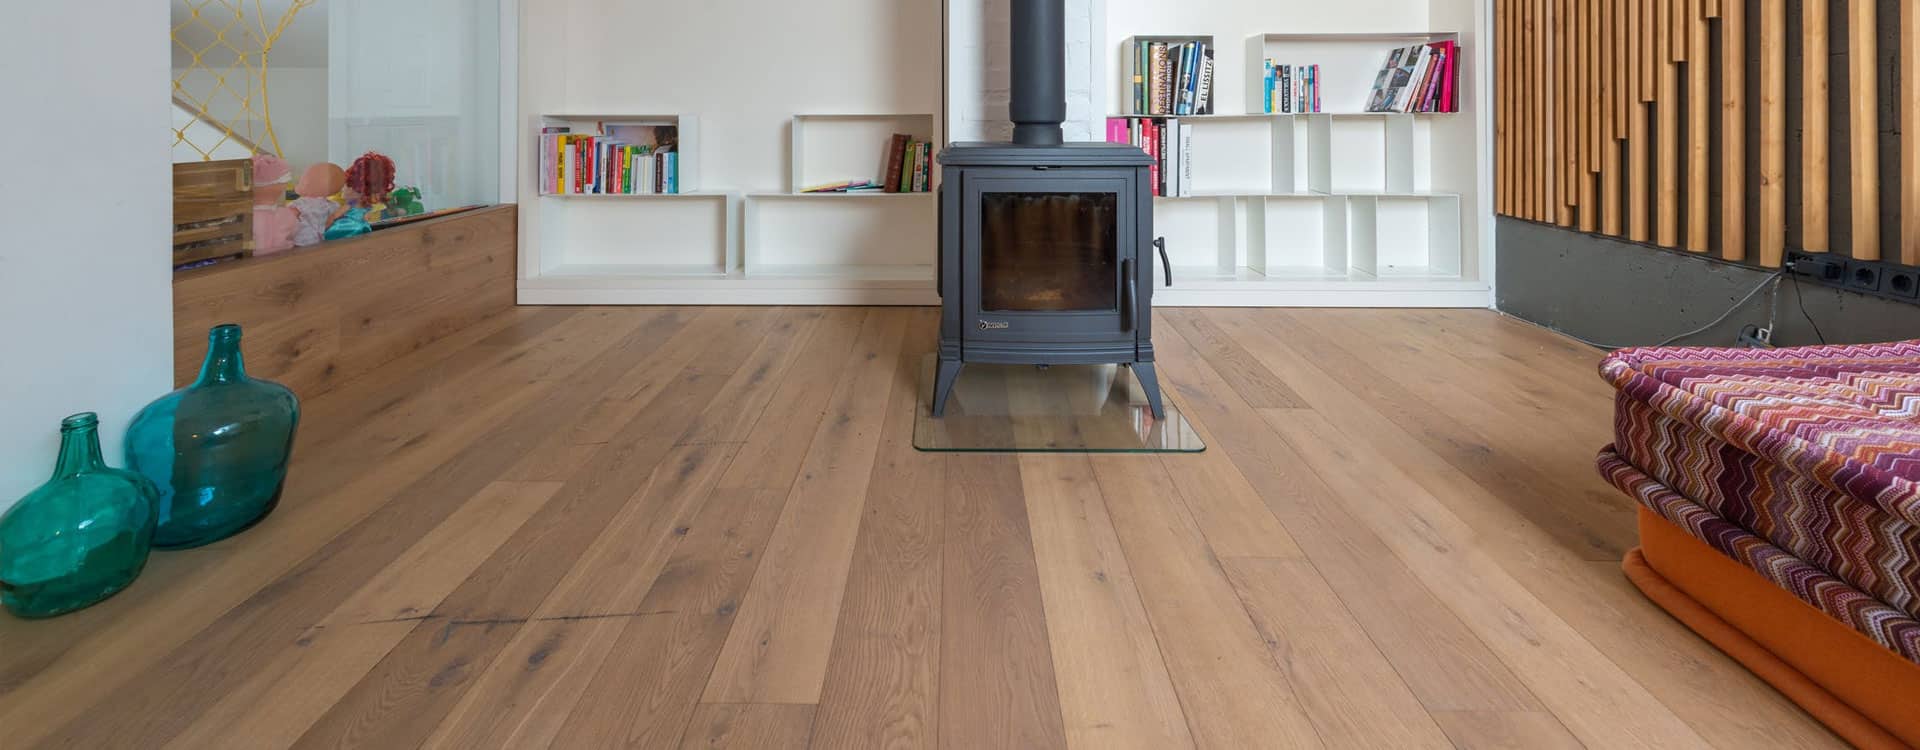 Rugged Up Warm Your Home This Winter - Flooring Experts in Brisbane, QLD